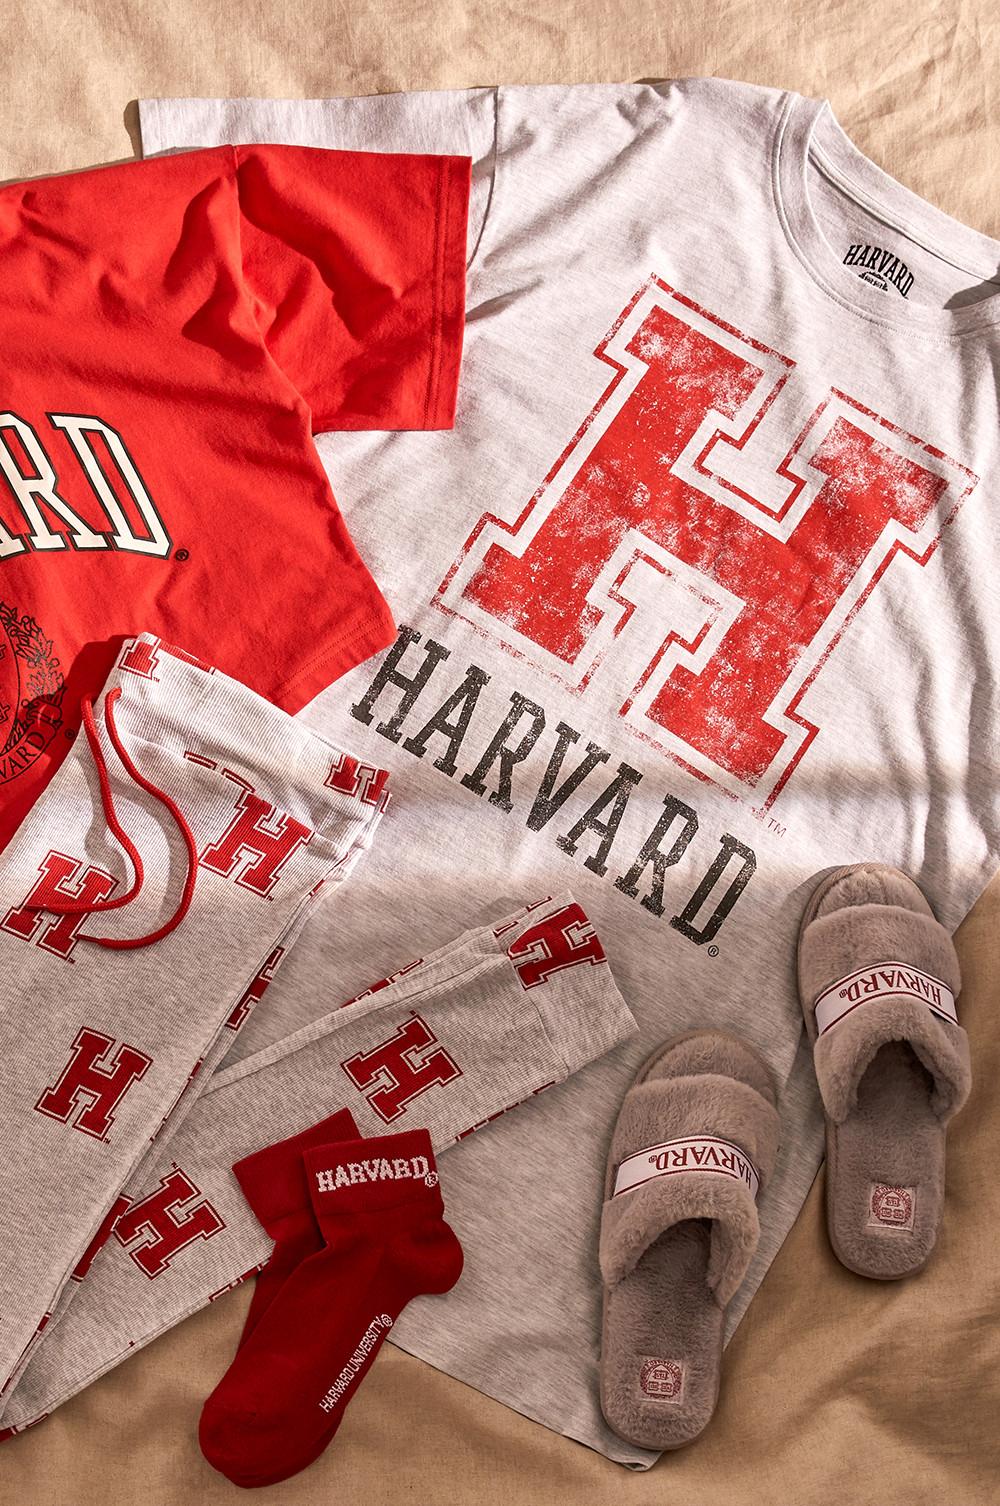 Flatlay shot of Harvard pyjamas and accessories in red and grey